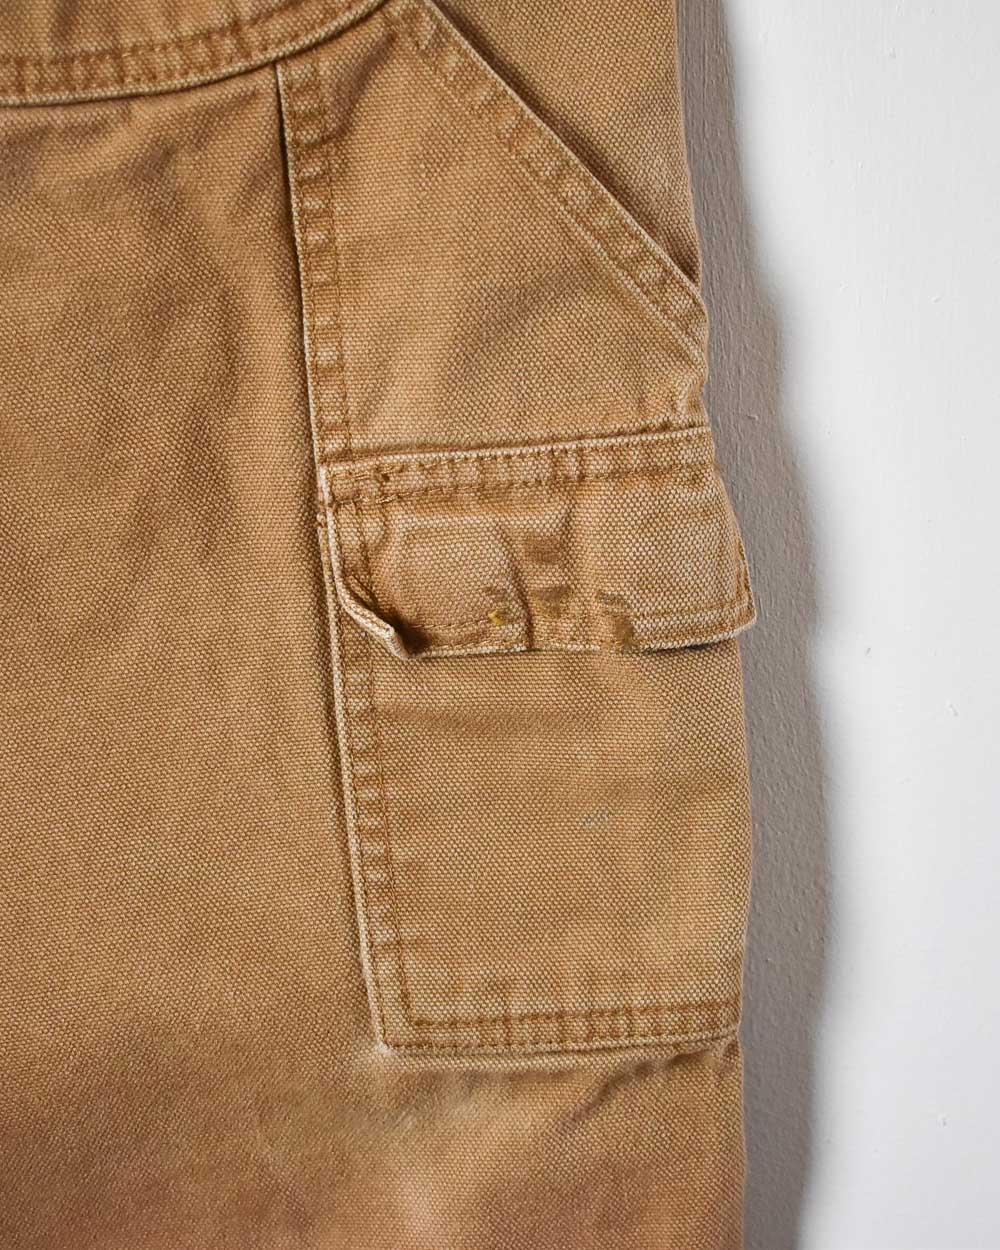 Neutral Dickies Double Knee Carpenter Jeans - W37 L28